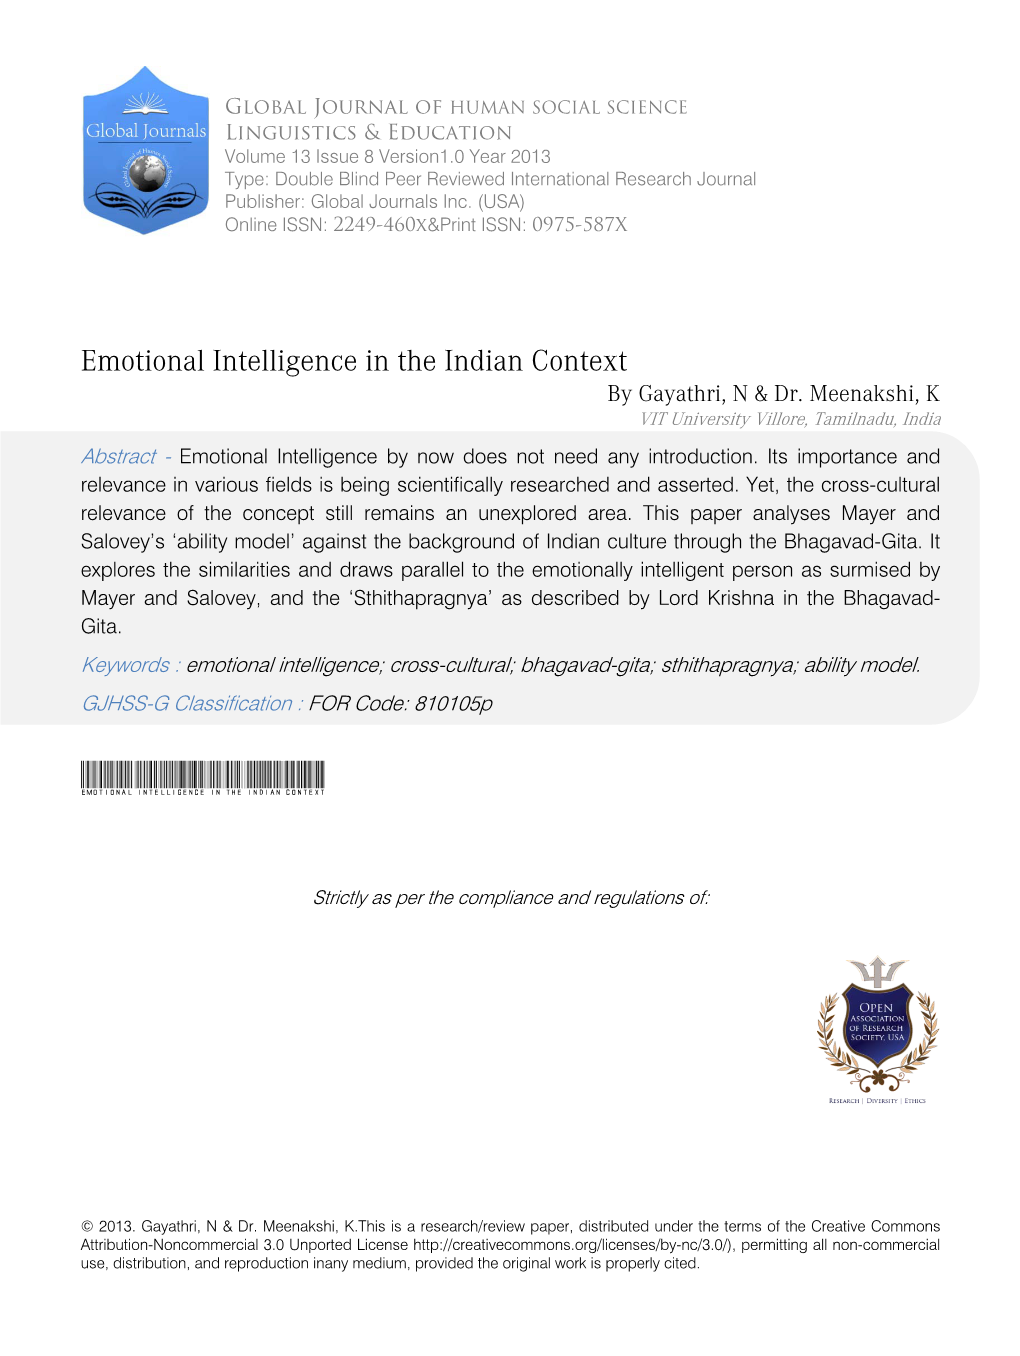 Emotional Intelligence in the Indian Context by Gayathri, N & Dr